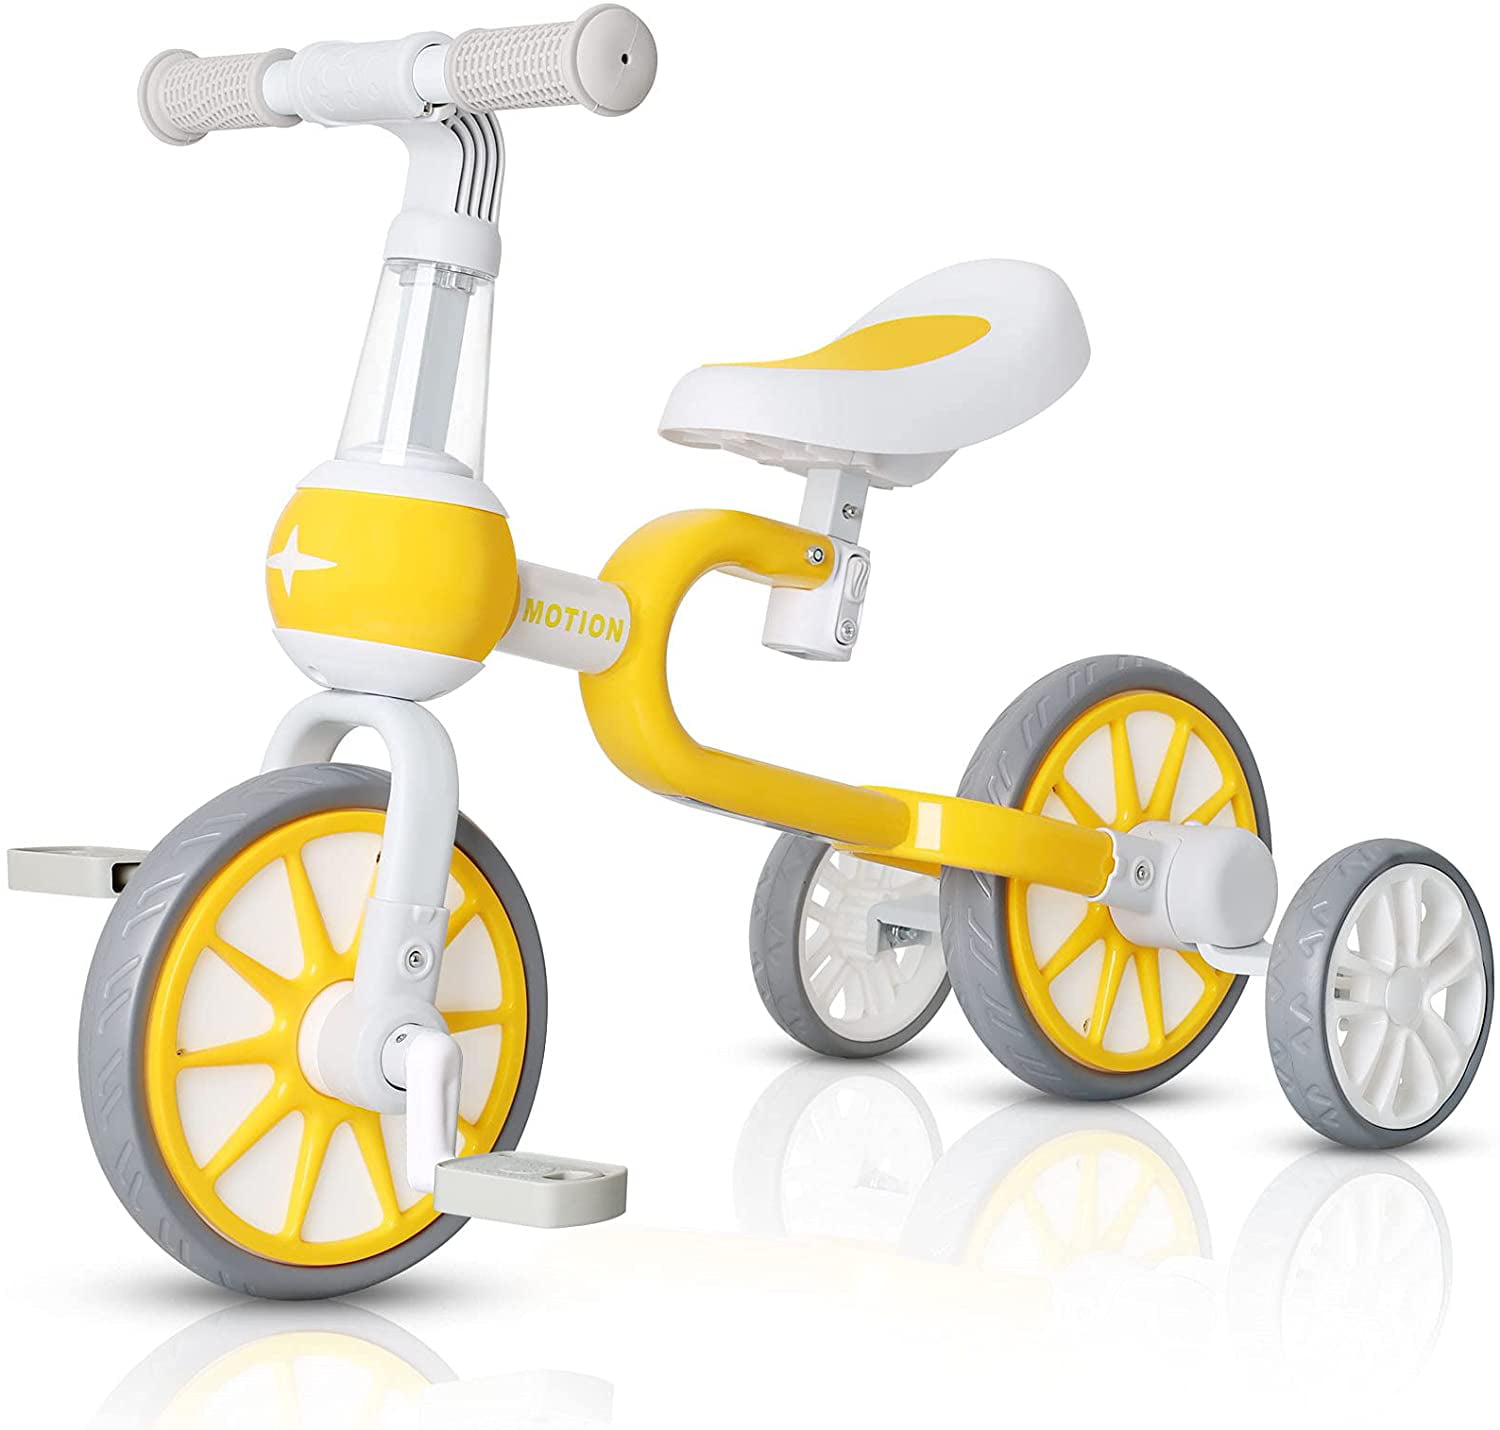 【US Spot】 Baby Balance Bike with Detachable Pedals 3 in 1 Toddler Walking Tricycle Bike Trike 3 Wheel Training Bike Bicycle for 2-4 Years Old Kids 